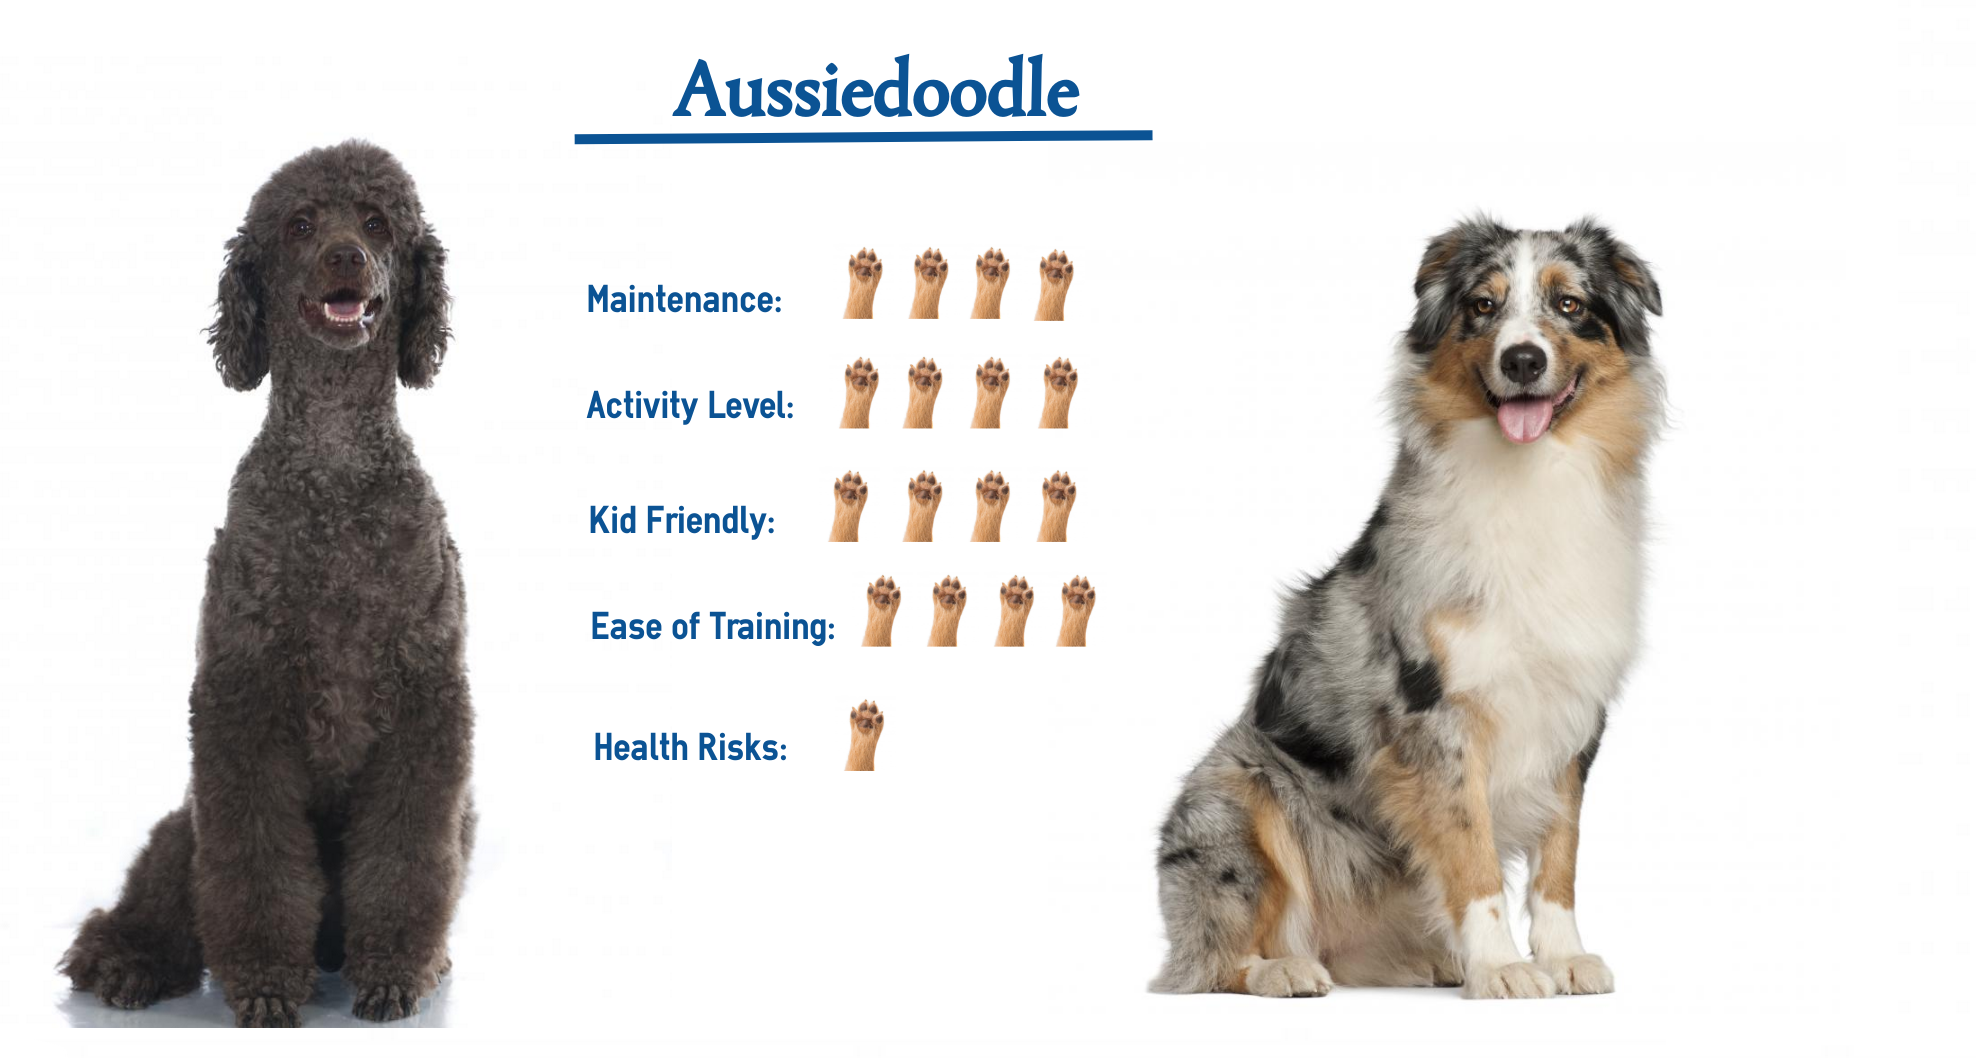 facts about aussiedoodles